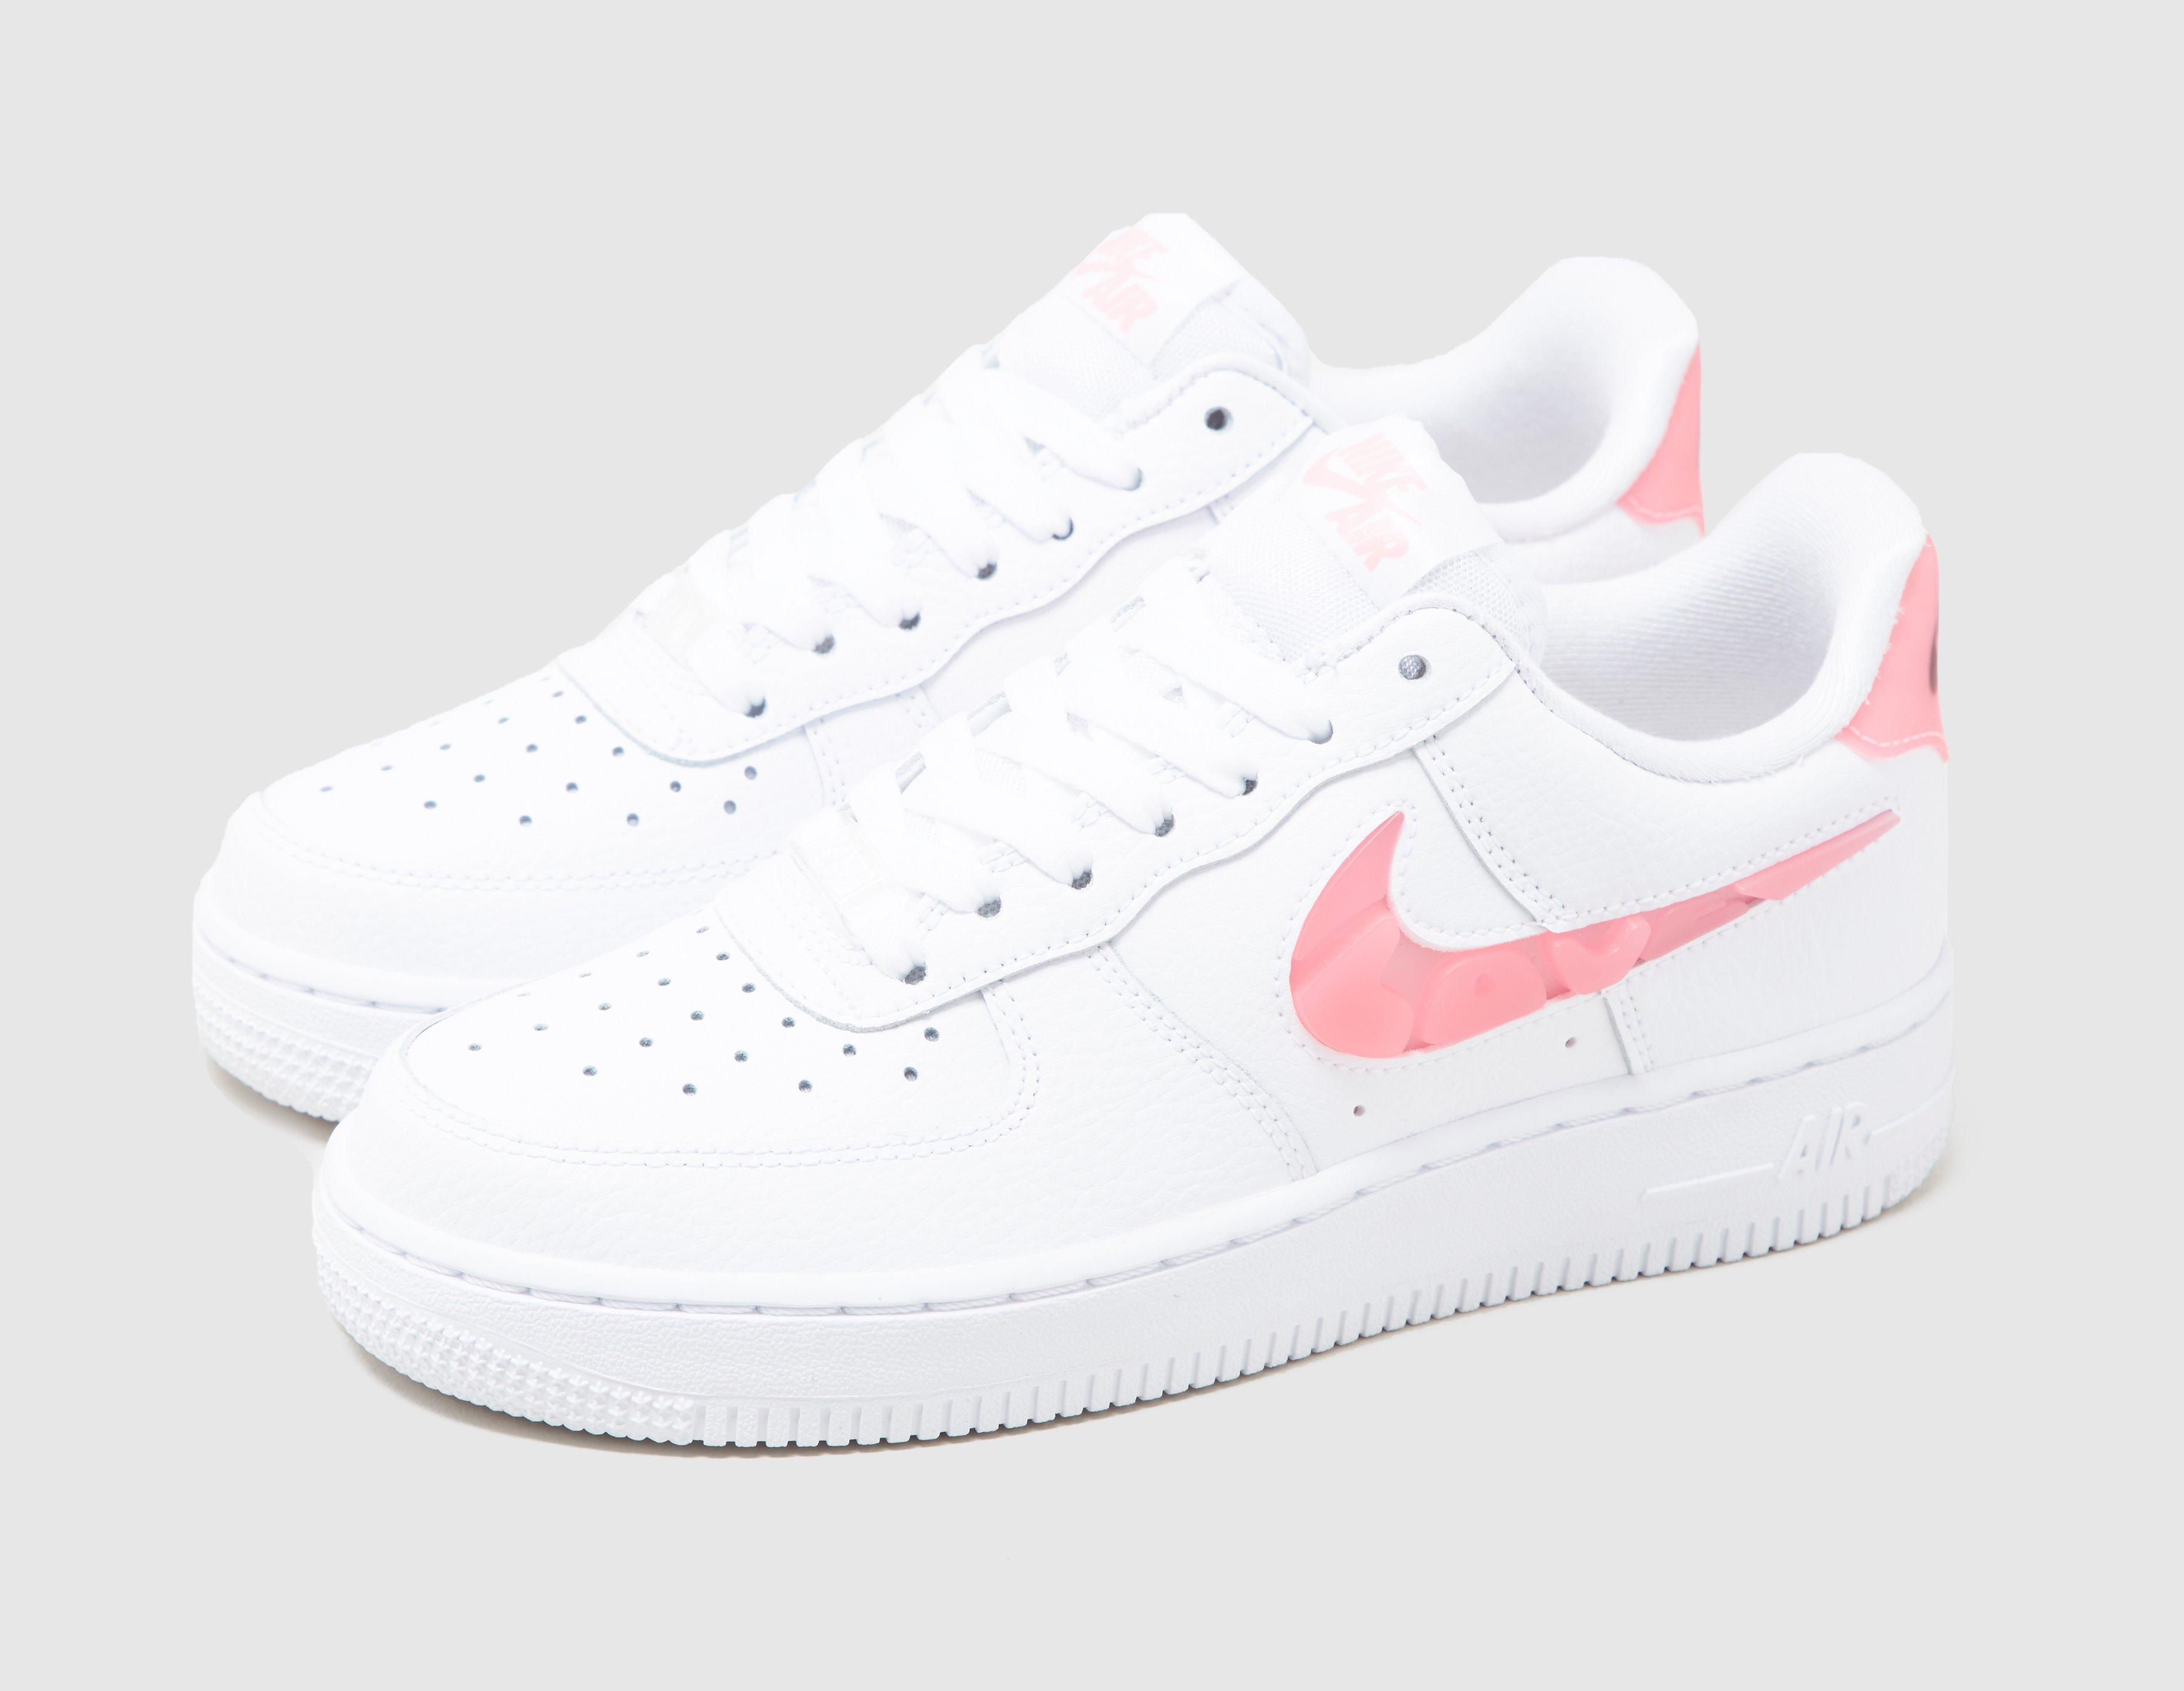 size 4.5 white air force 1